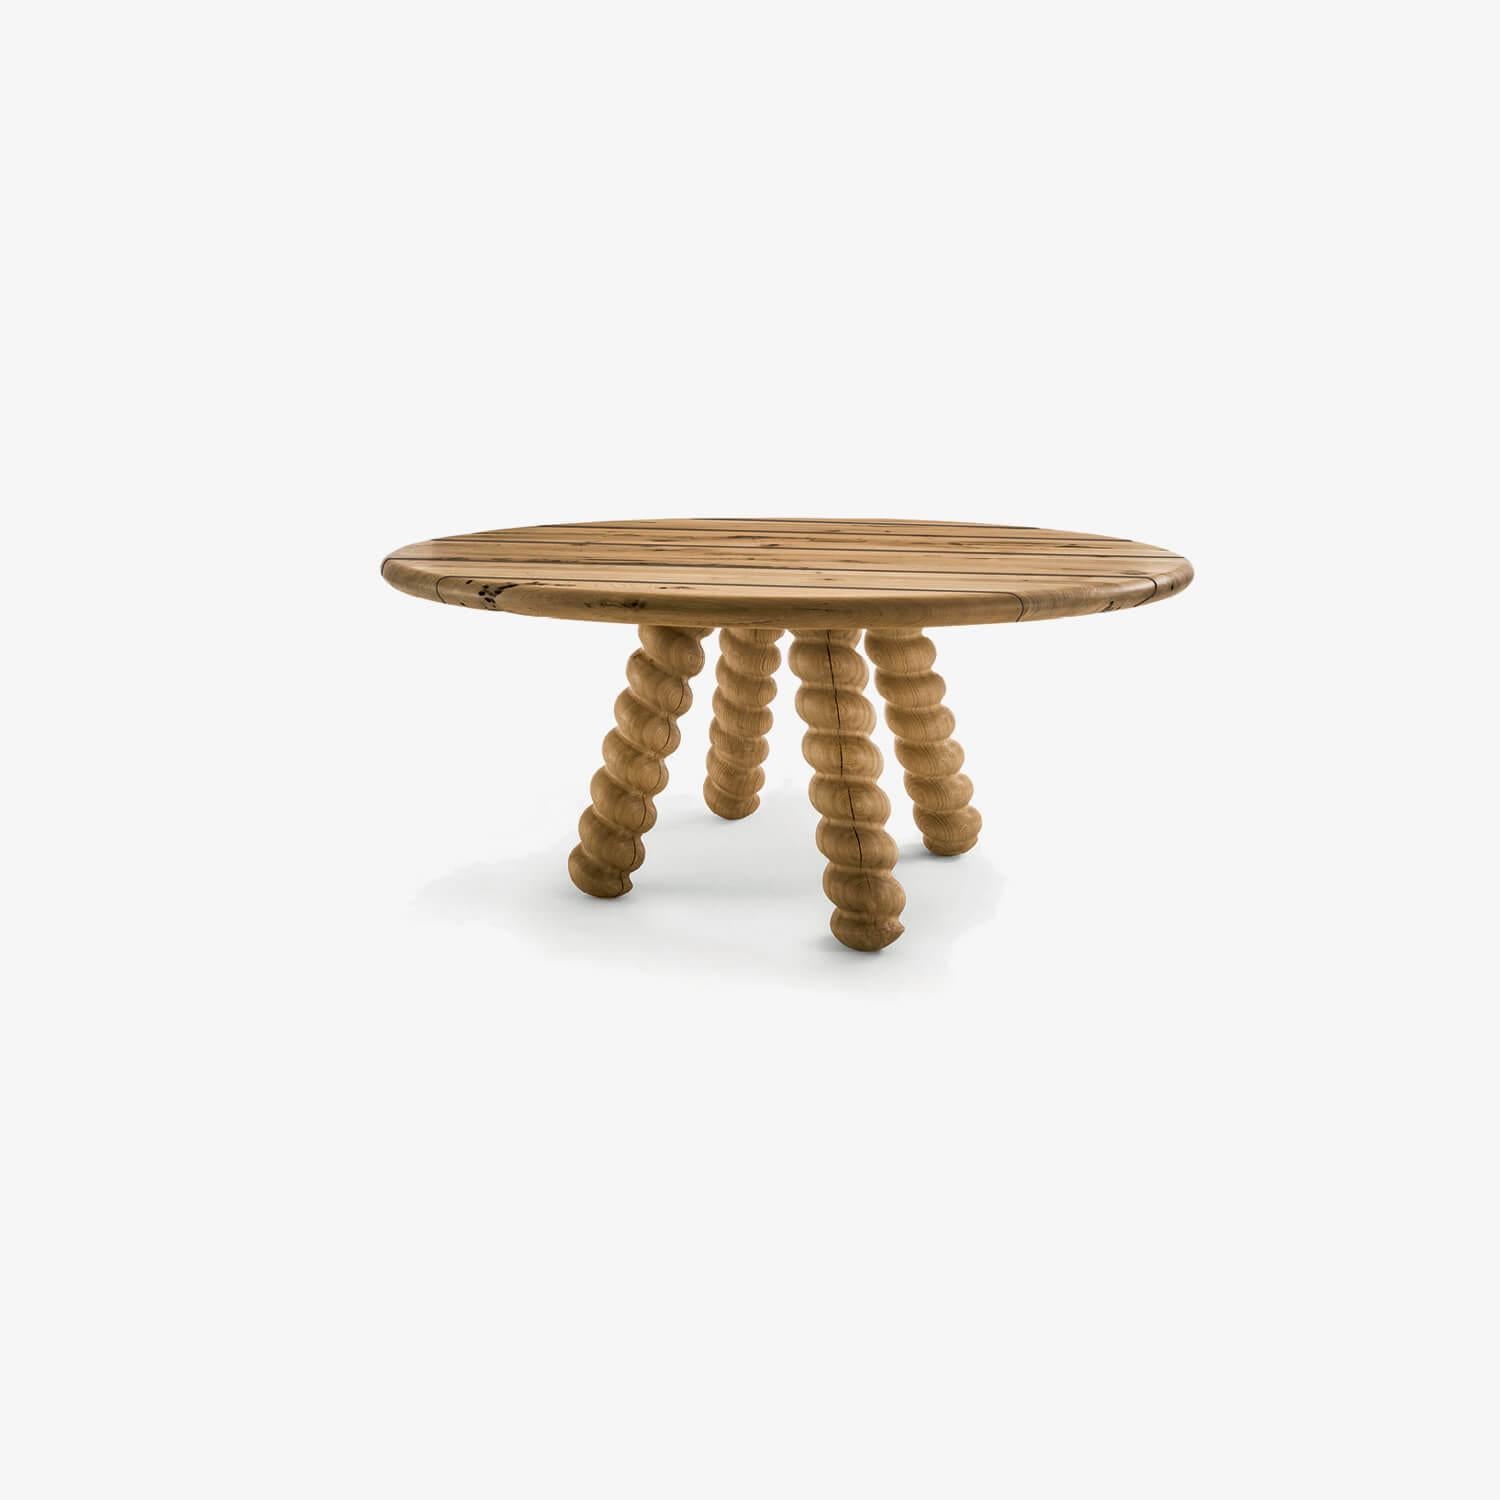 Round table with top in Briccola in planks, not glued, and 4 oak legs turned in form of a spiral, placed in the middle and oblique